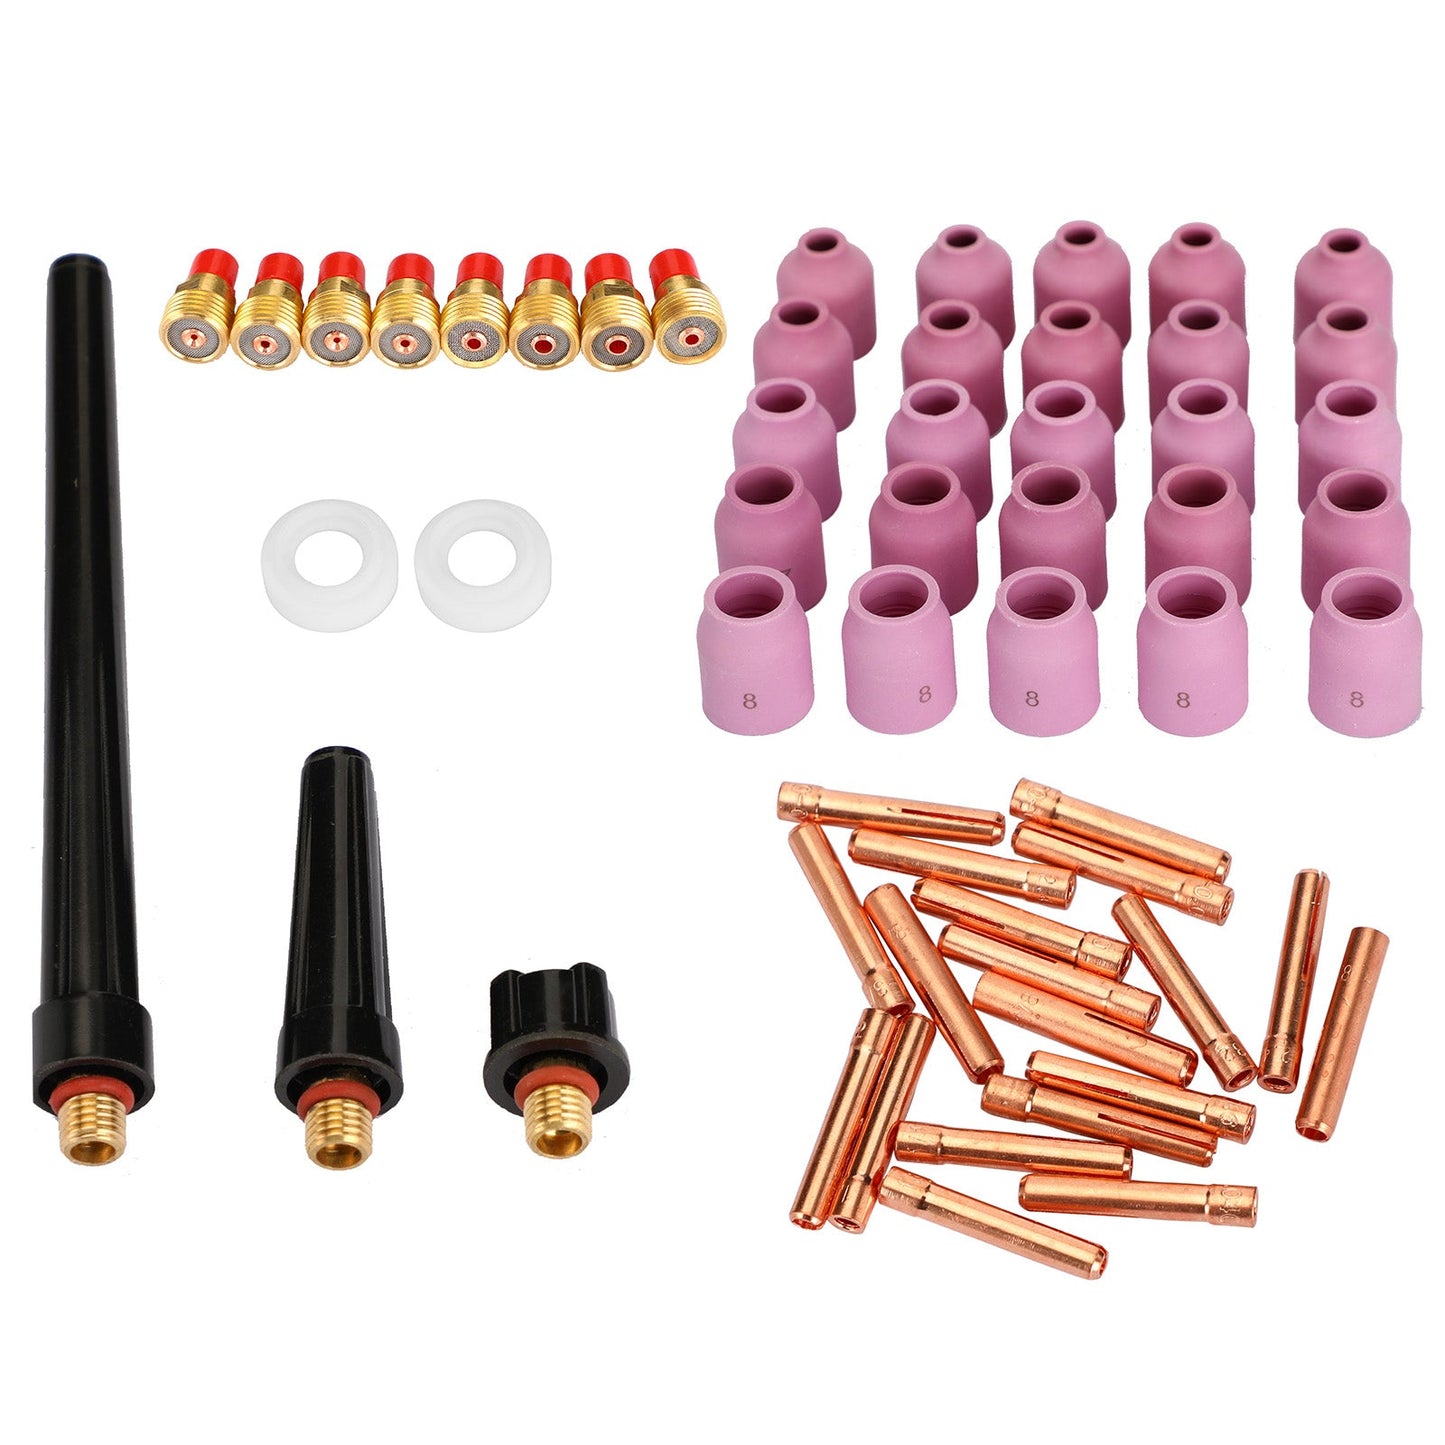 58Pcs Tig Welding Torch Stubby Gas Lens Consumables Cup Kit For Wp-9/20/25